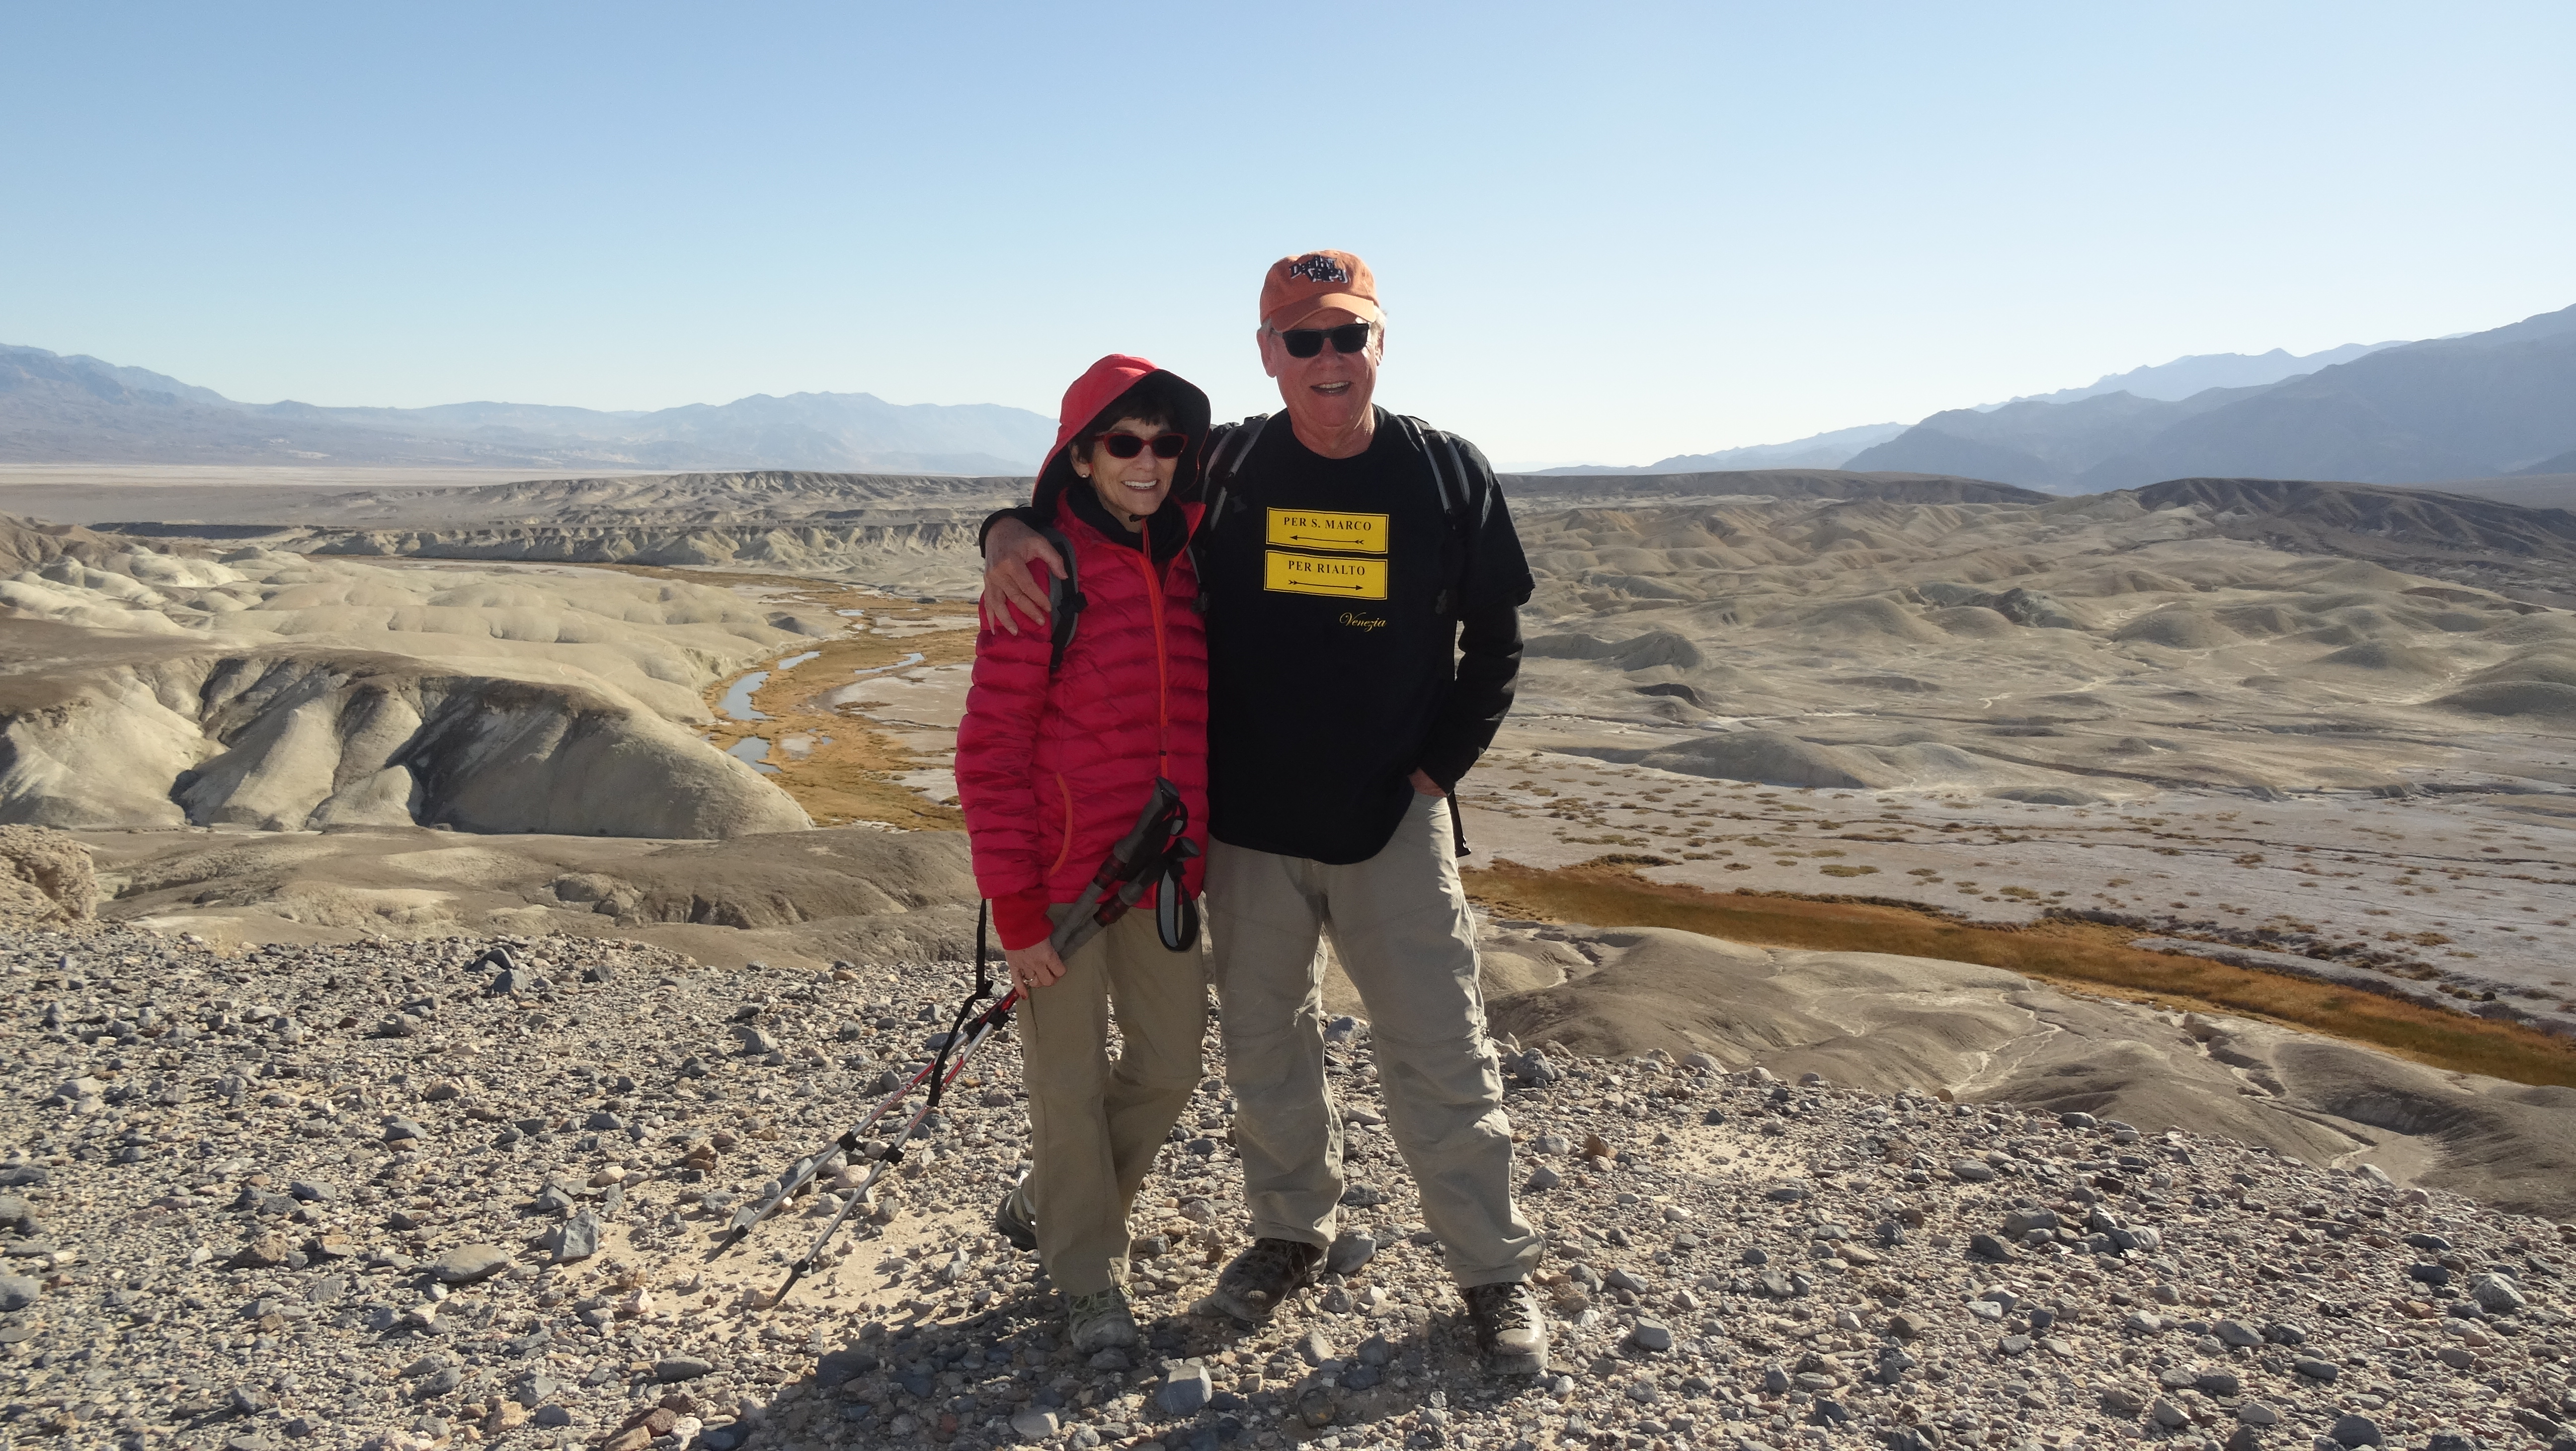 January 2015 - Death Valley,CA